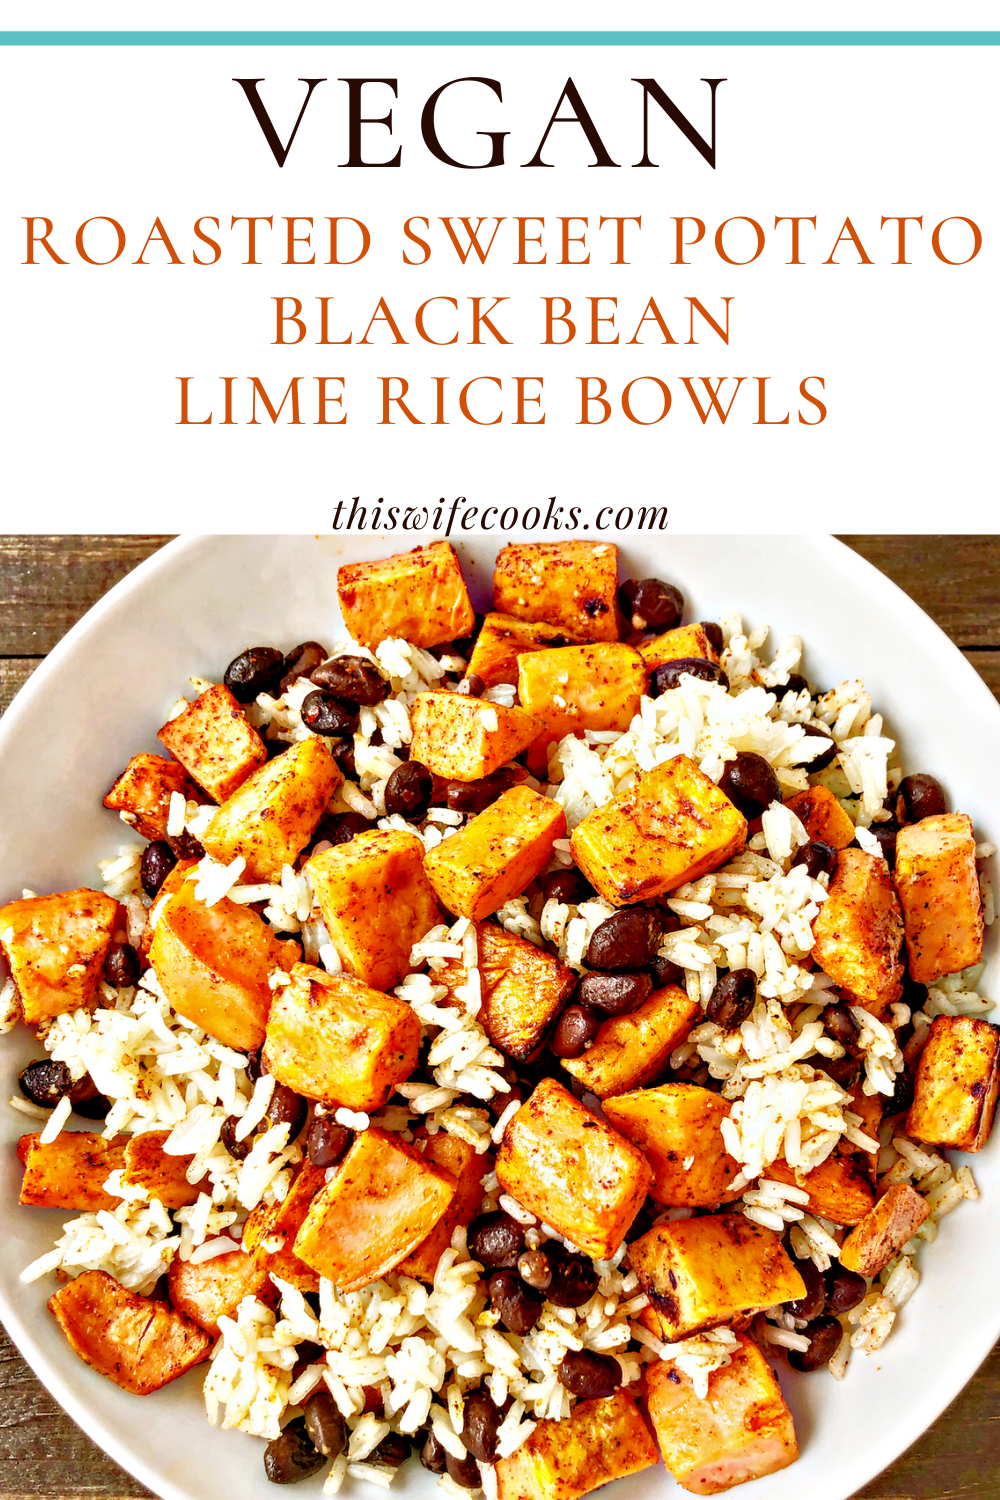 Roasted Sweet Potato, Black Bean and Lime Rice Bowls | A colorful, tasty, satisfying, protein-packed, budget-friendly meal, you can have on the table in about 30-40 minutes! | thiswifecooks.com | #healthyveganrecipes #ricebowlrecipes #roastedsweetpotato via @thiswifecooks